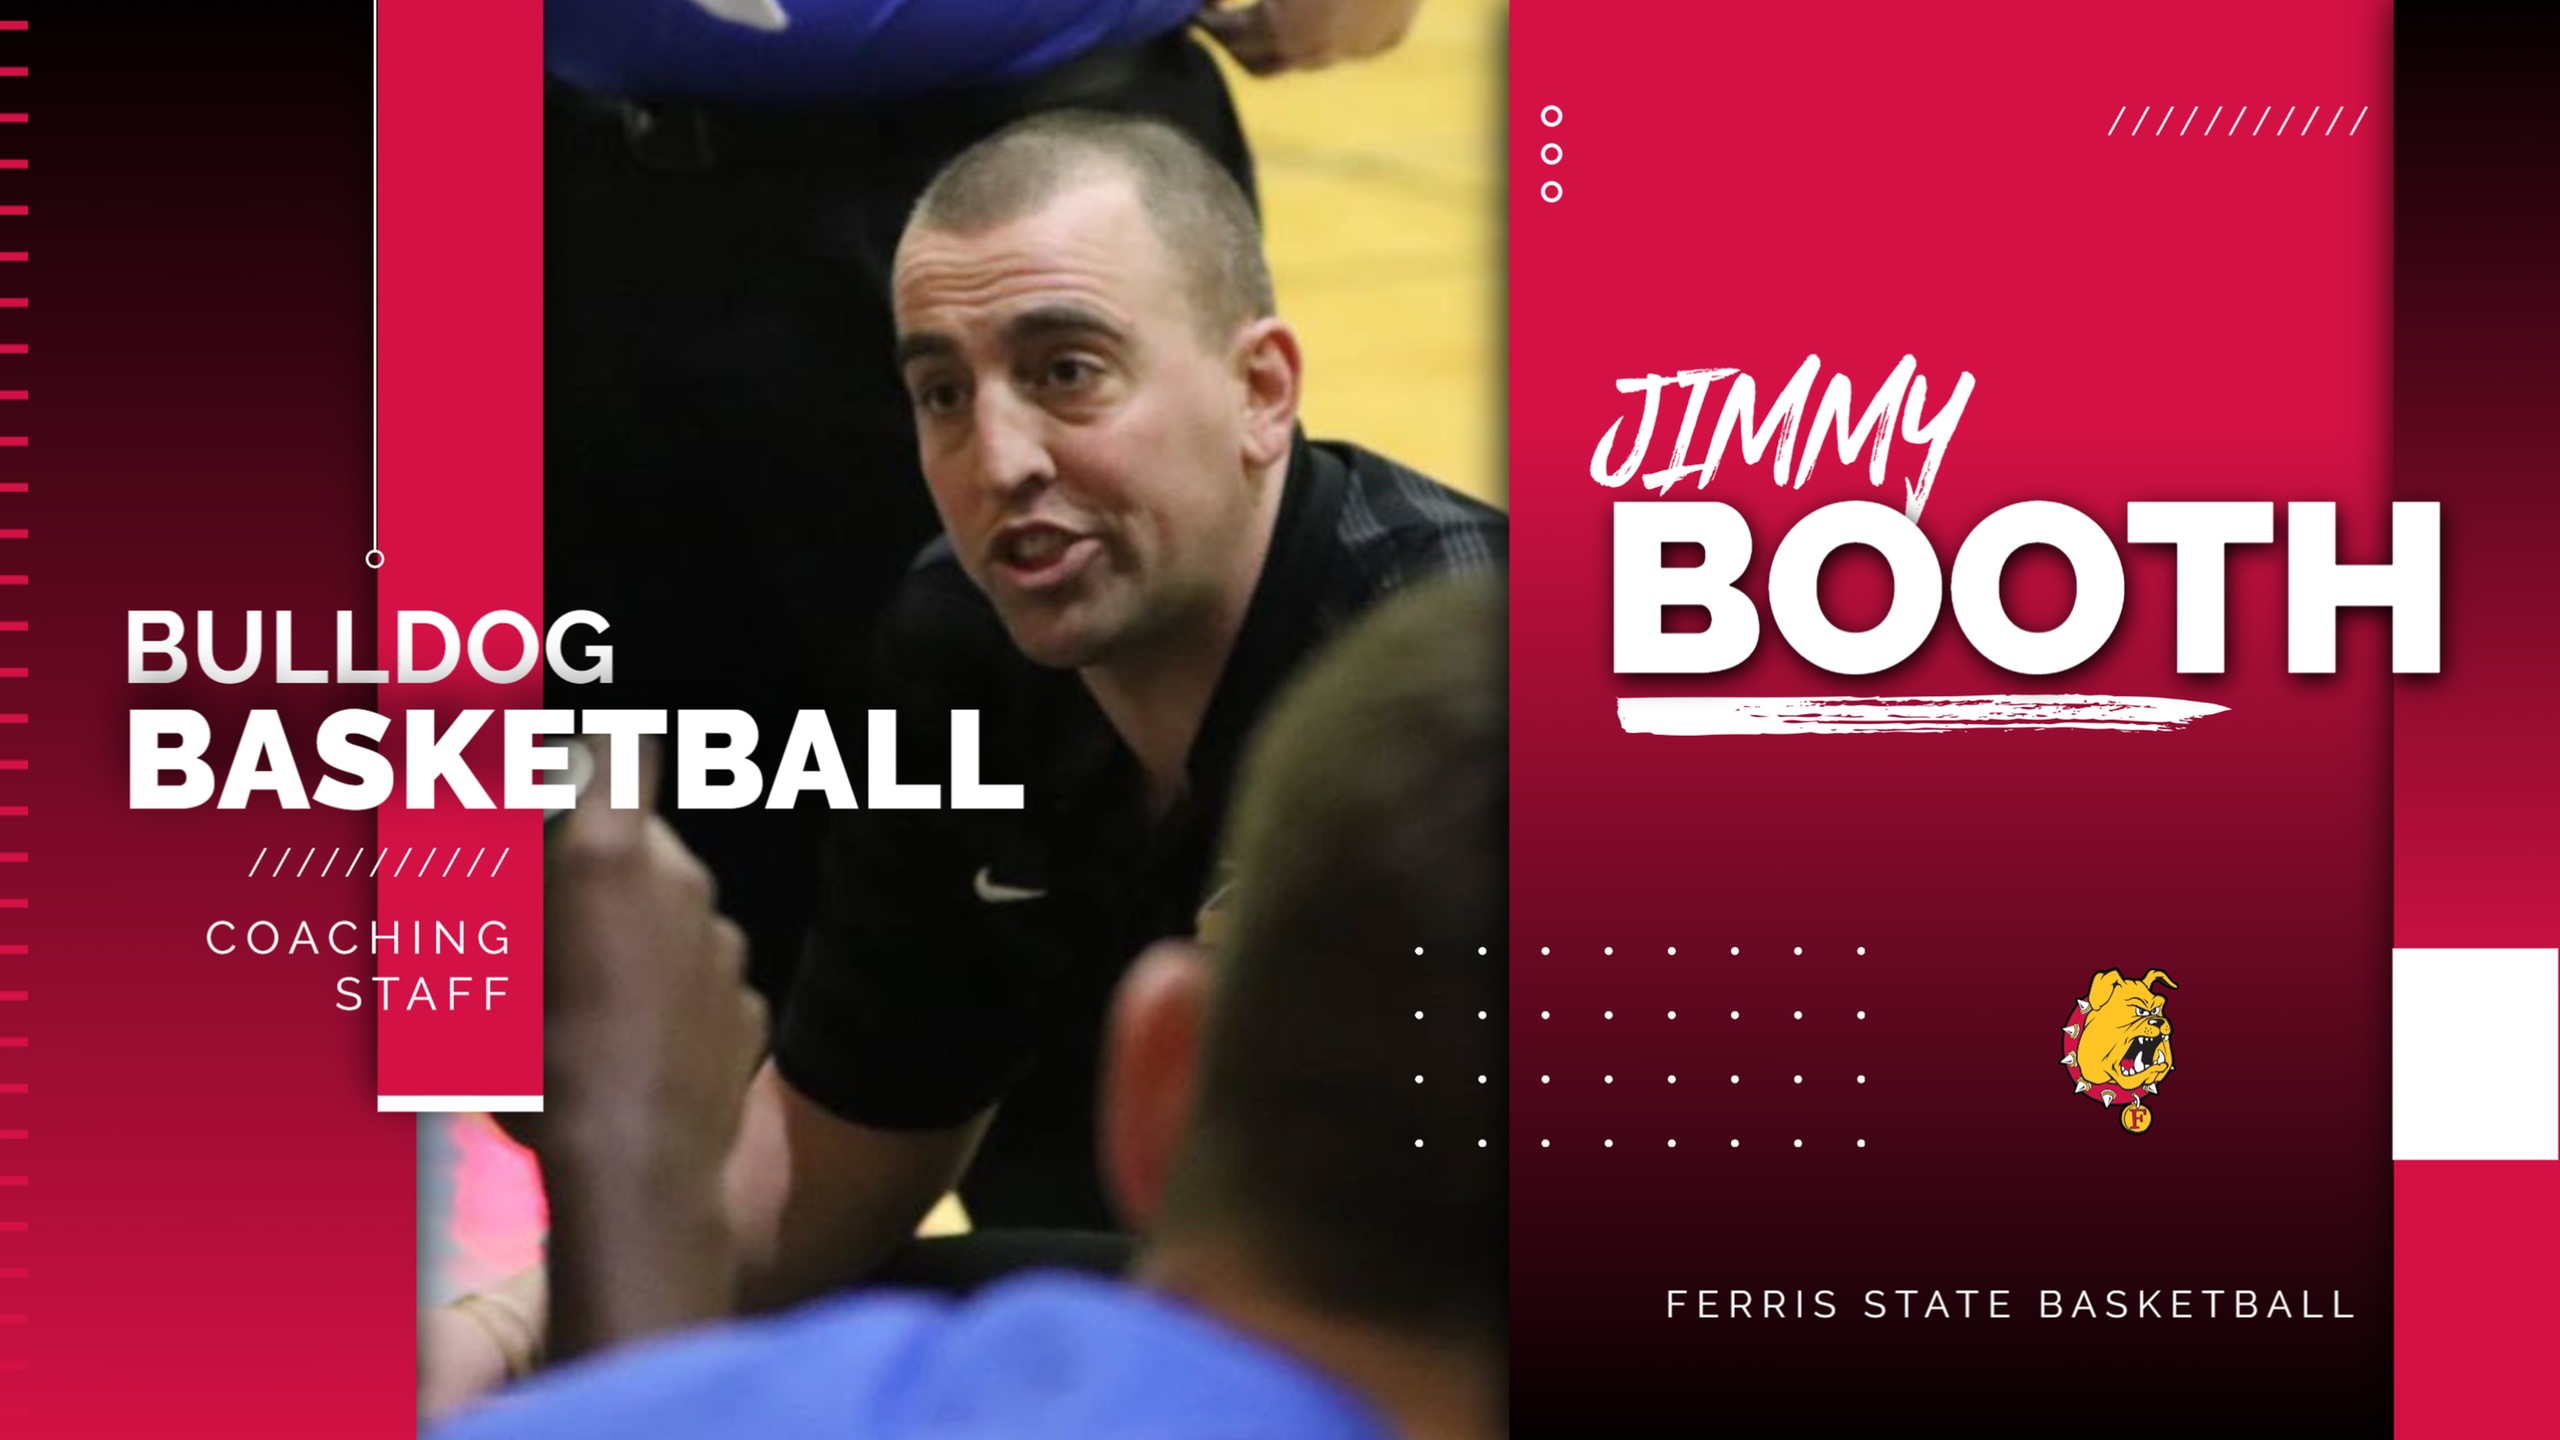 West Michigan Native And JUCO Head Coach Jimmy Booth Joins Ferris State Basketball Staff